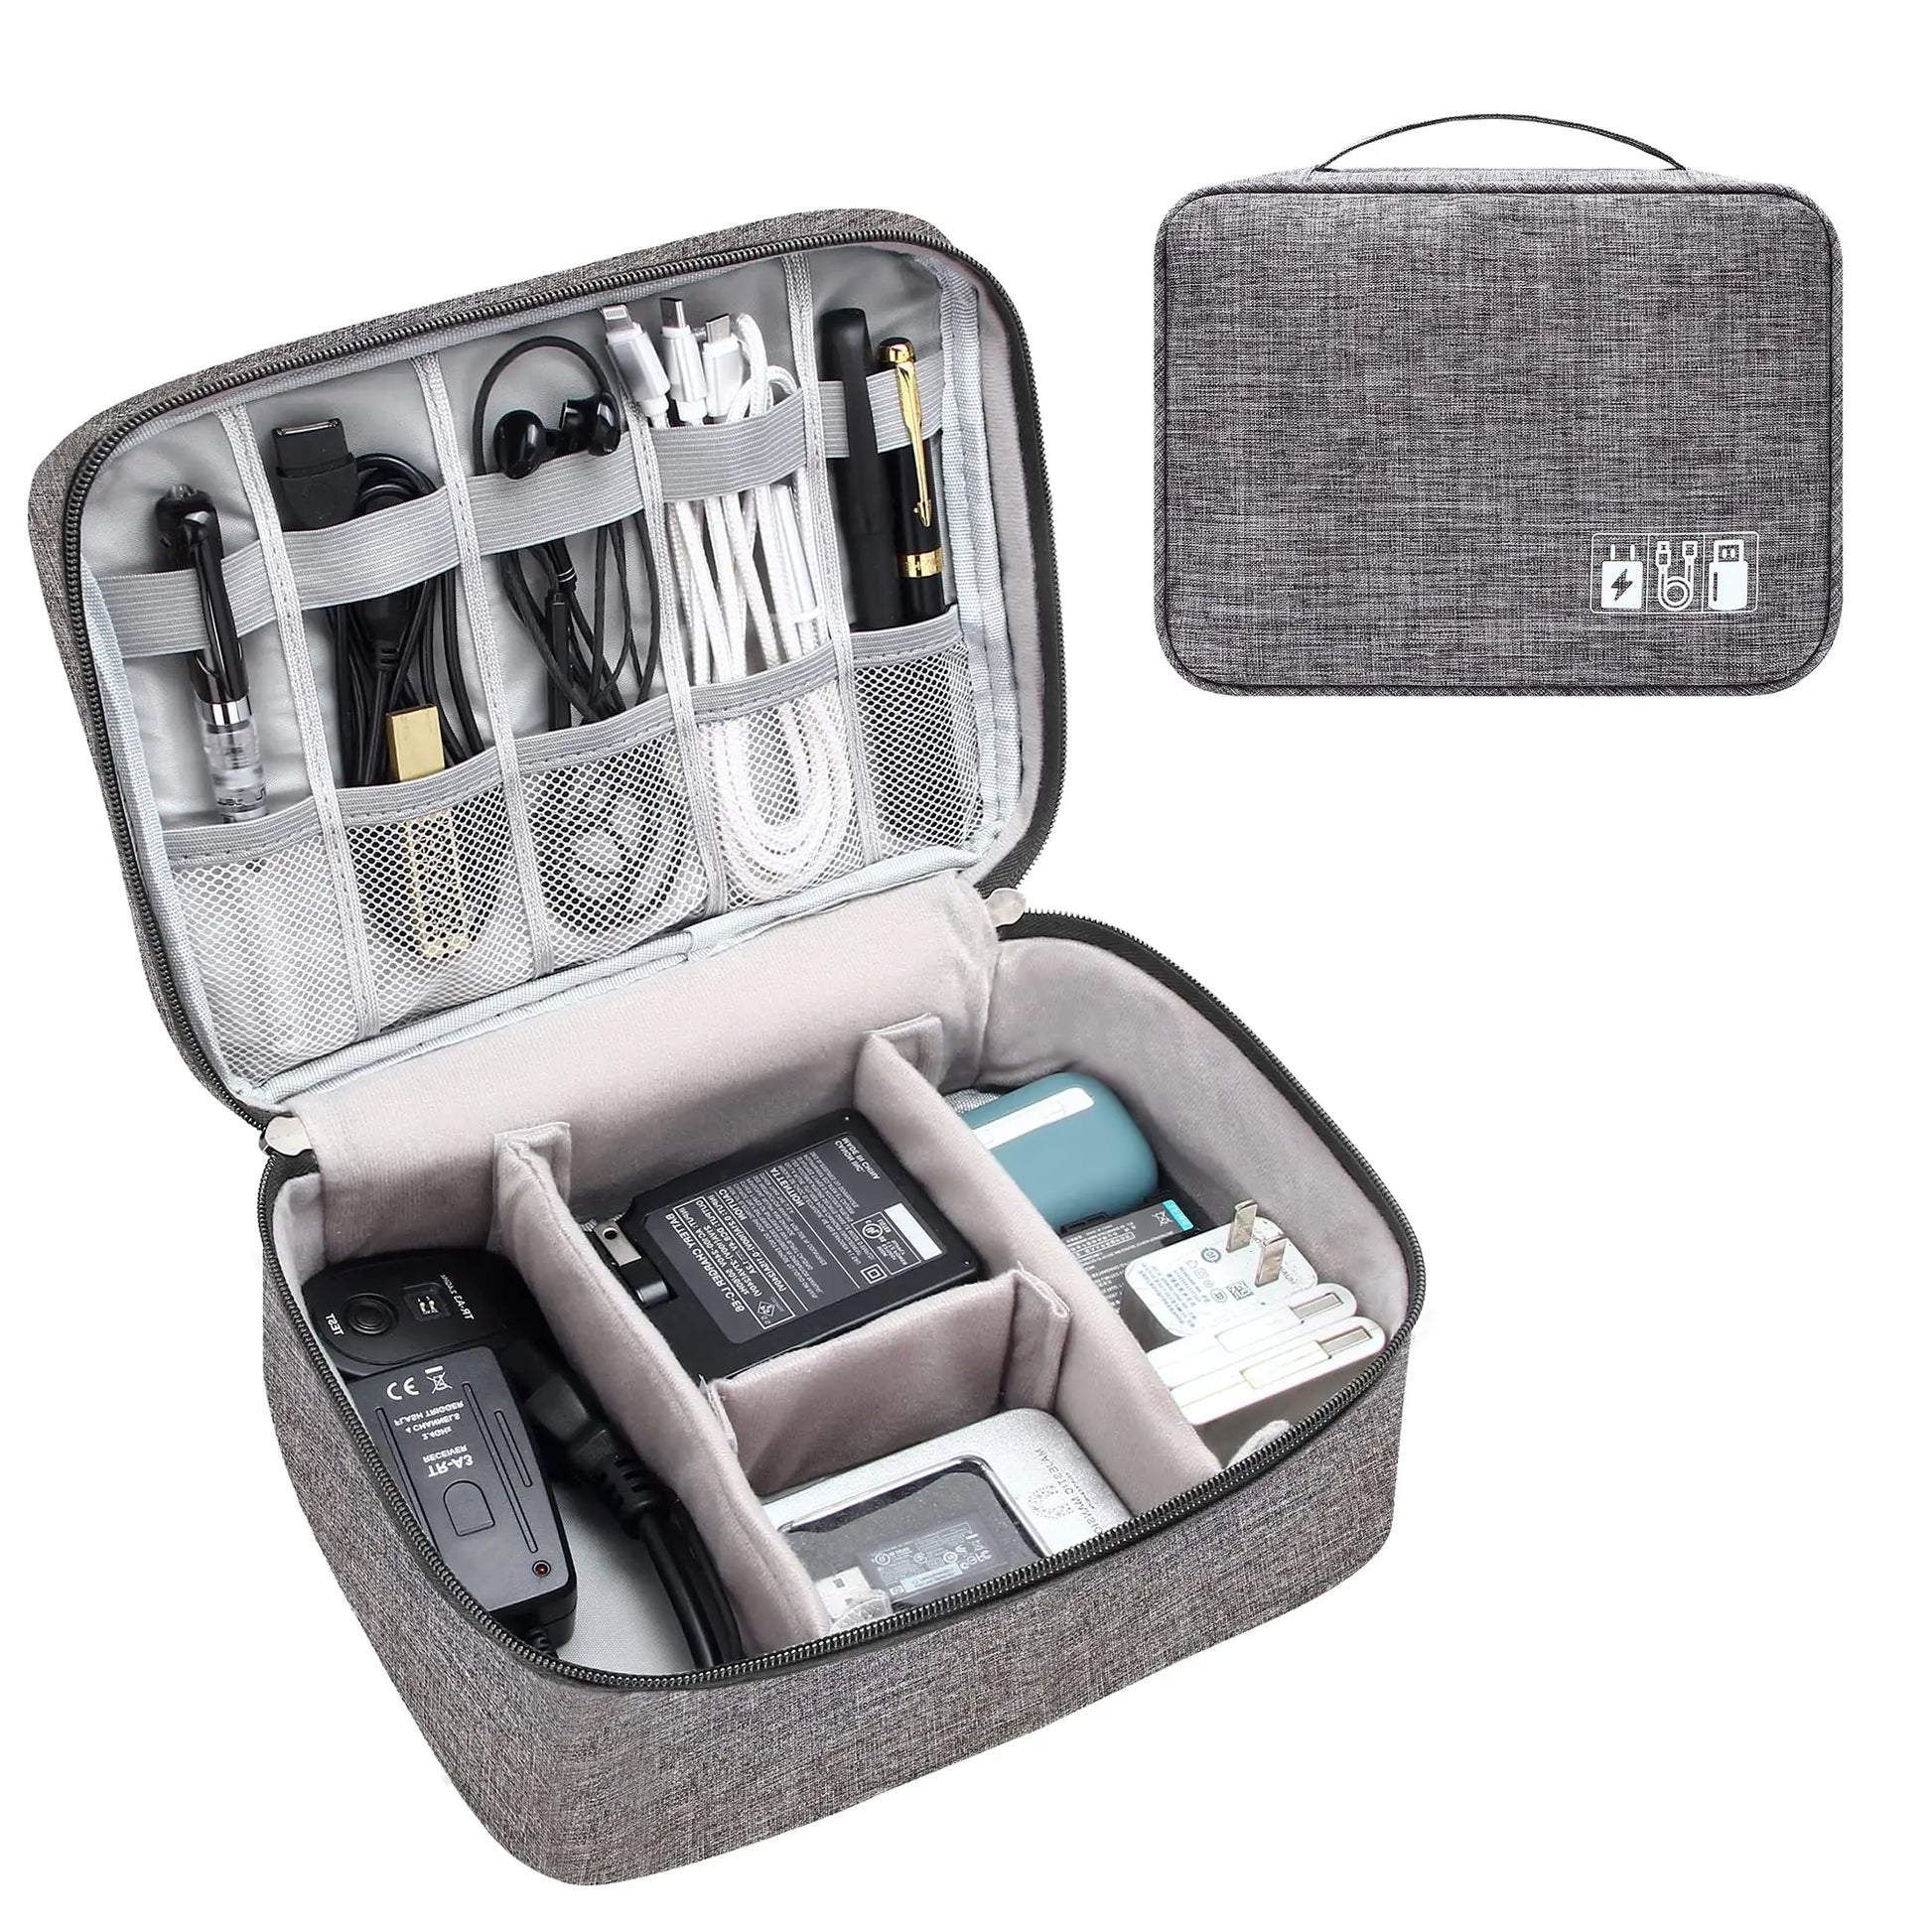 Electronics Organizer Travel Cable Organizer Bag Waterproof Portable Digital Storage Bag Electronic Accessories Case Cable Charger Organizer Case - TechClub868